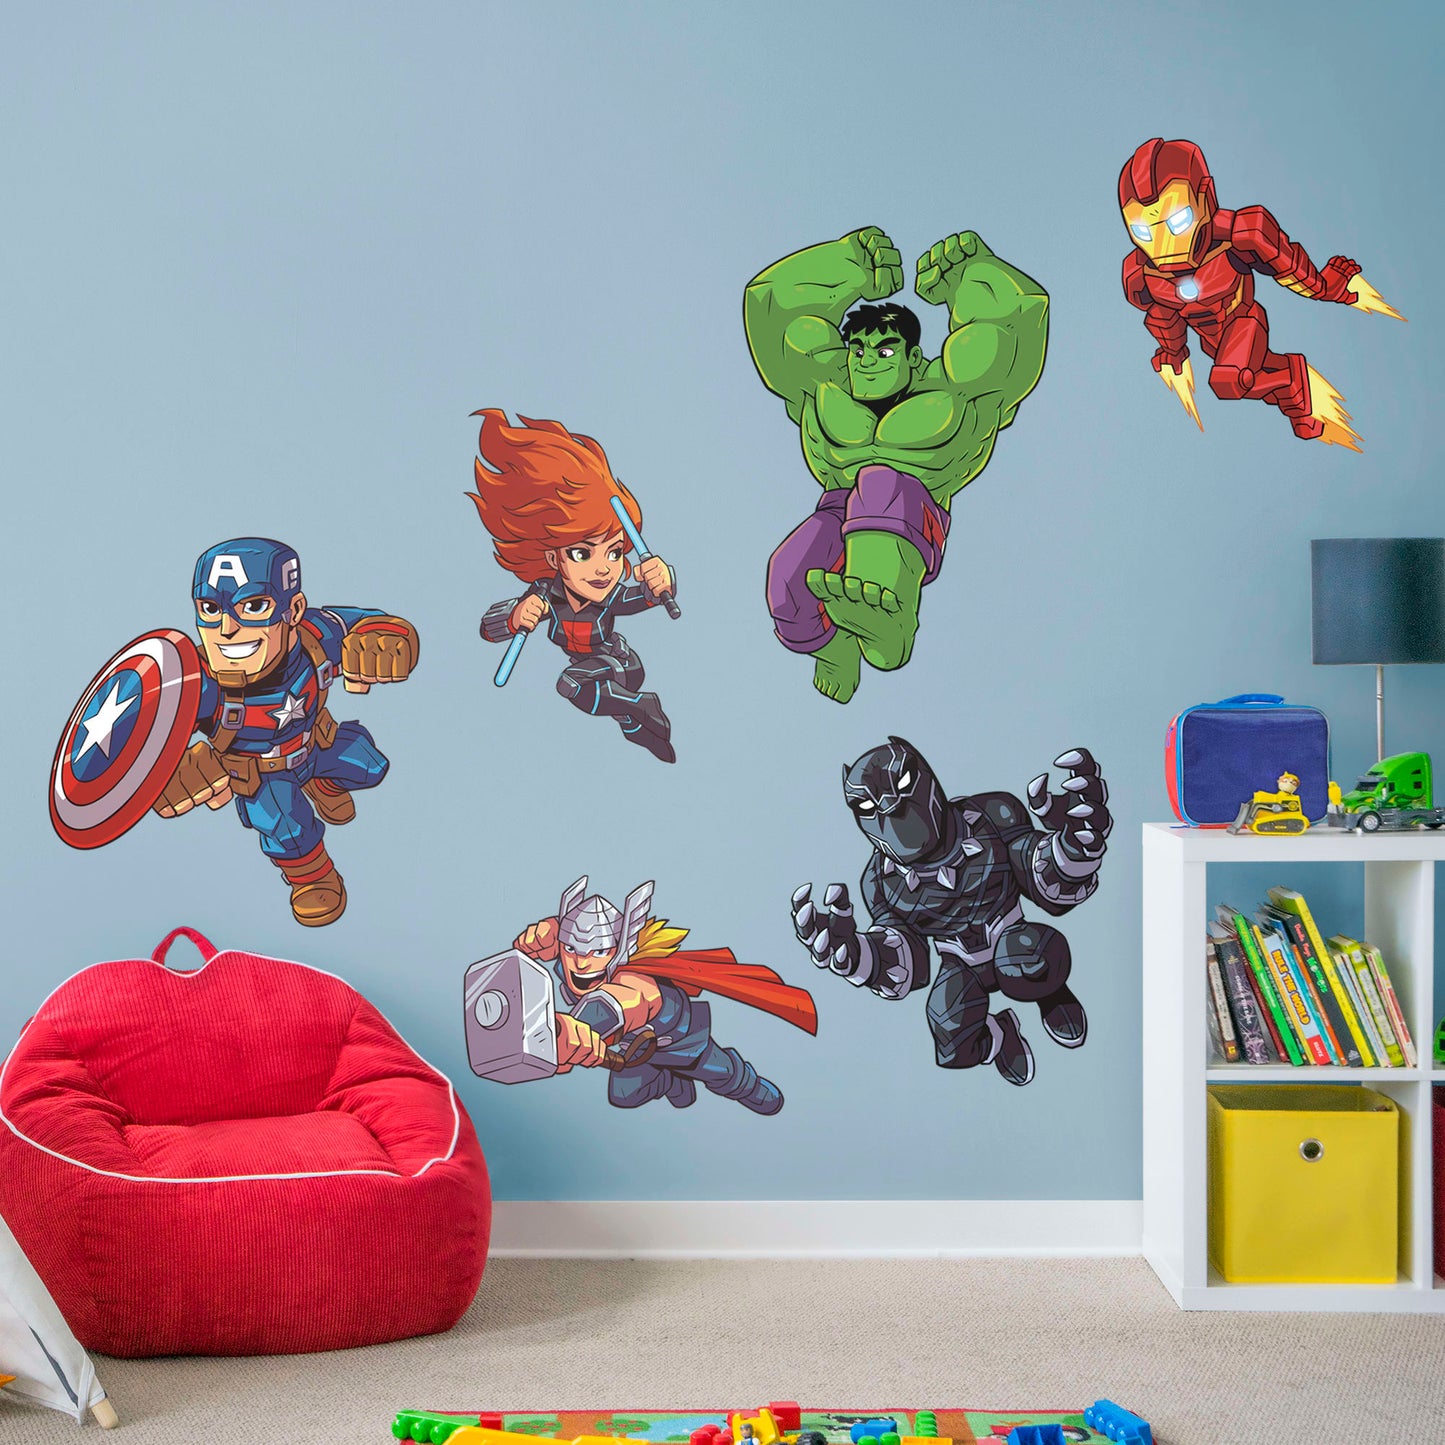 Avengers Assemble: Marvel Super Hero Adventures Collection - Officially Licensed Removable Wall Decal